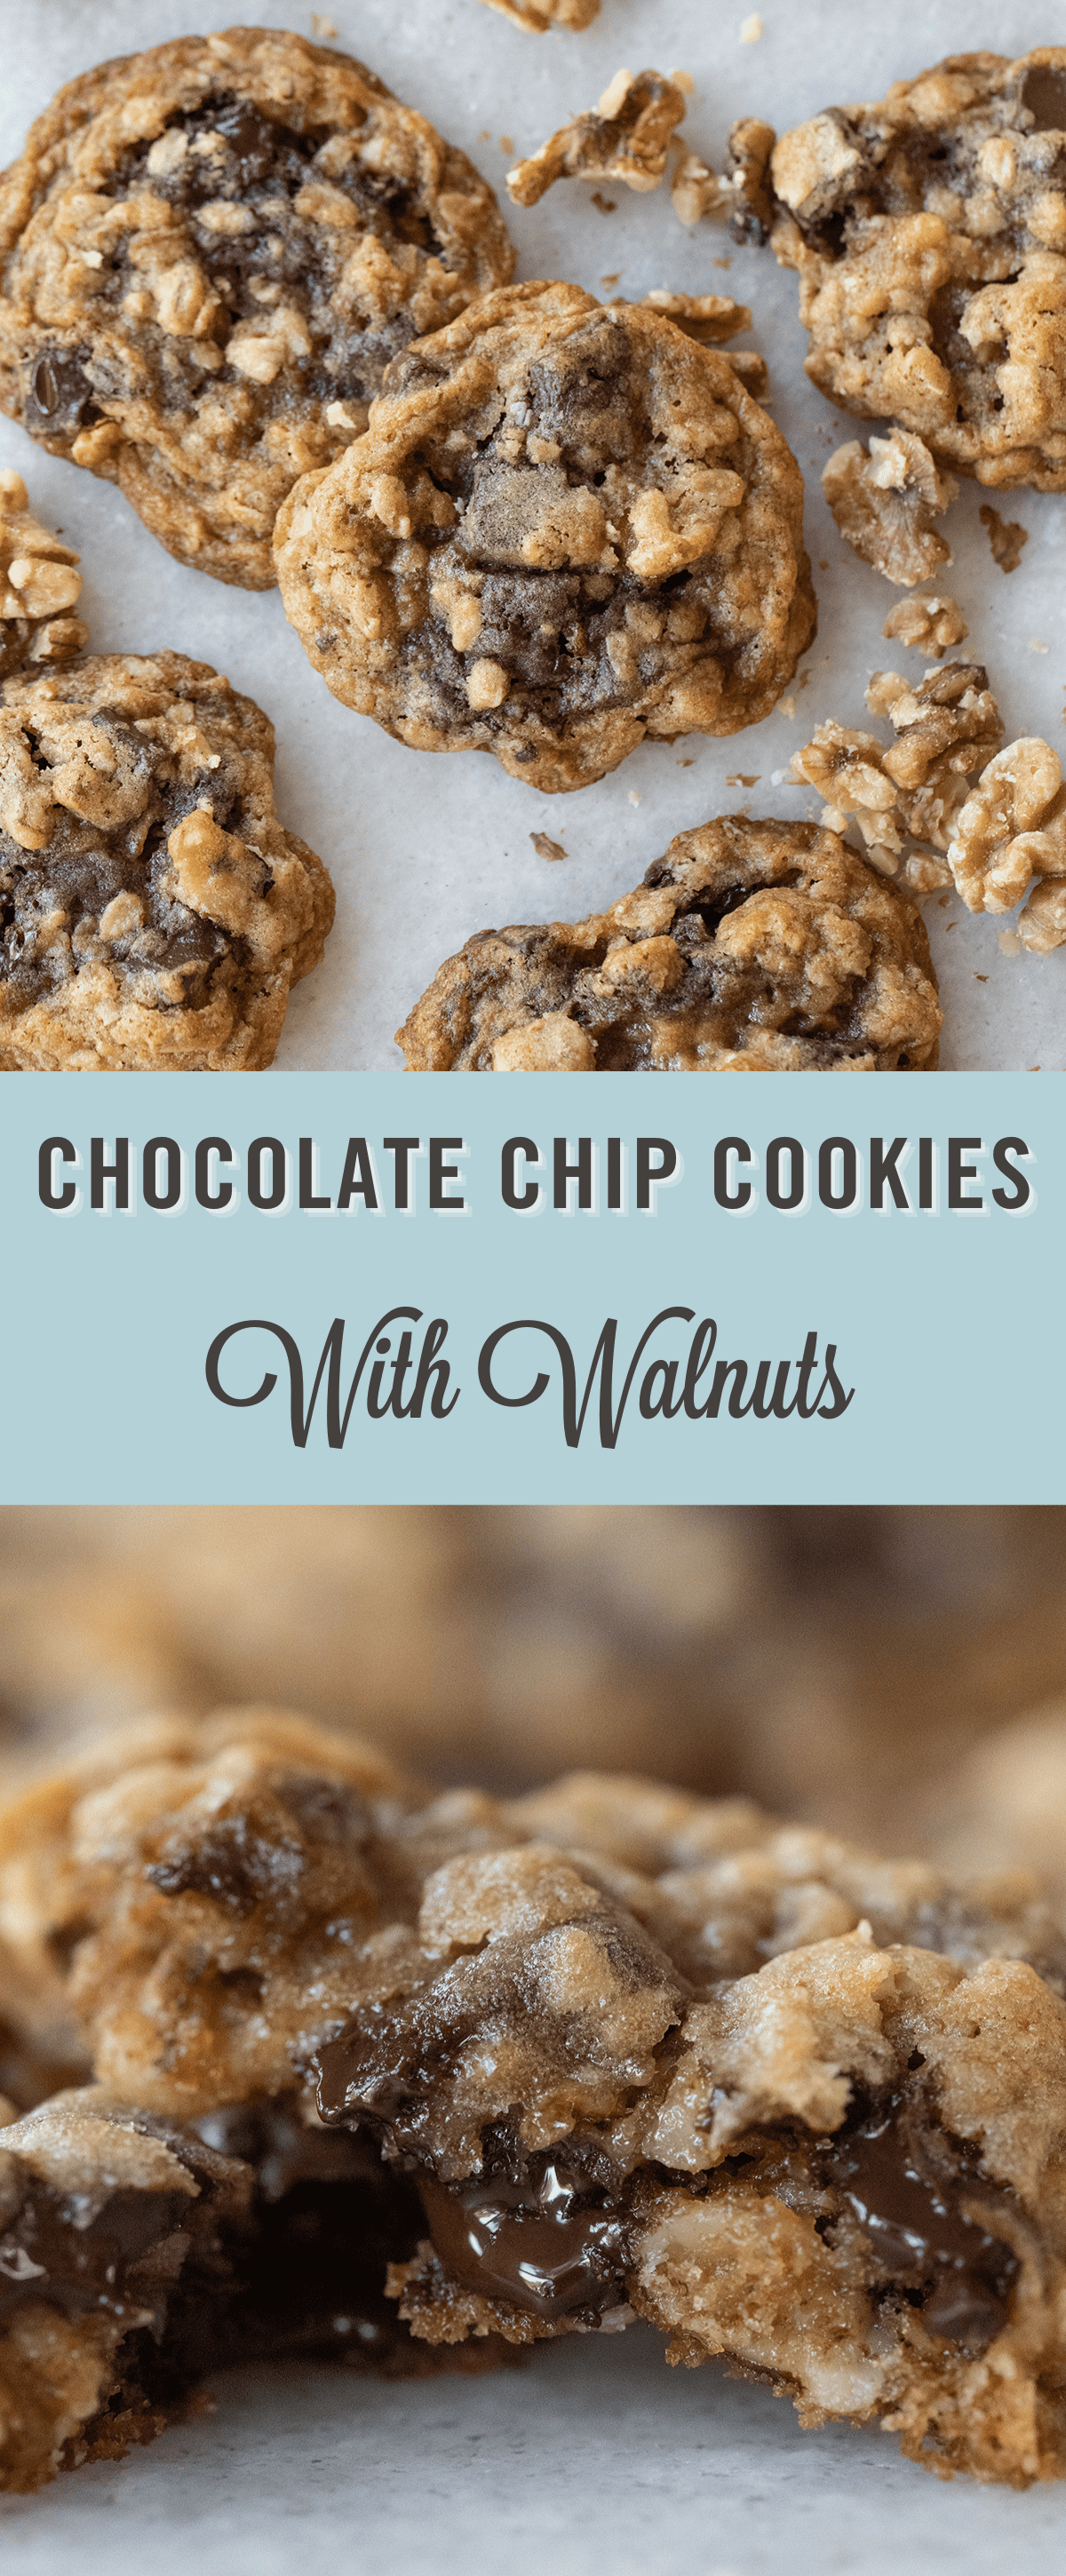 Chocolate chip cookies with walnuts.